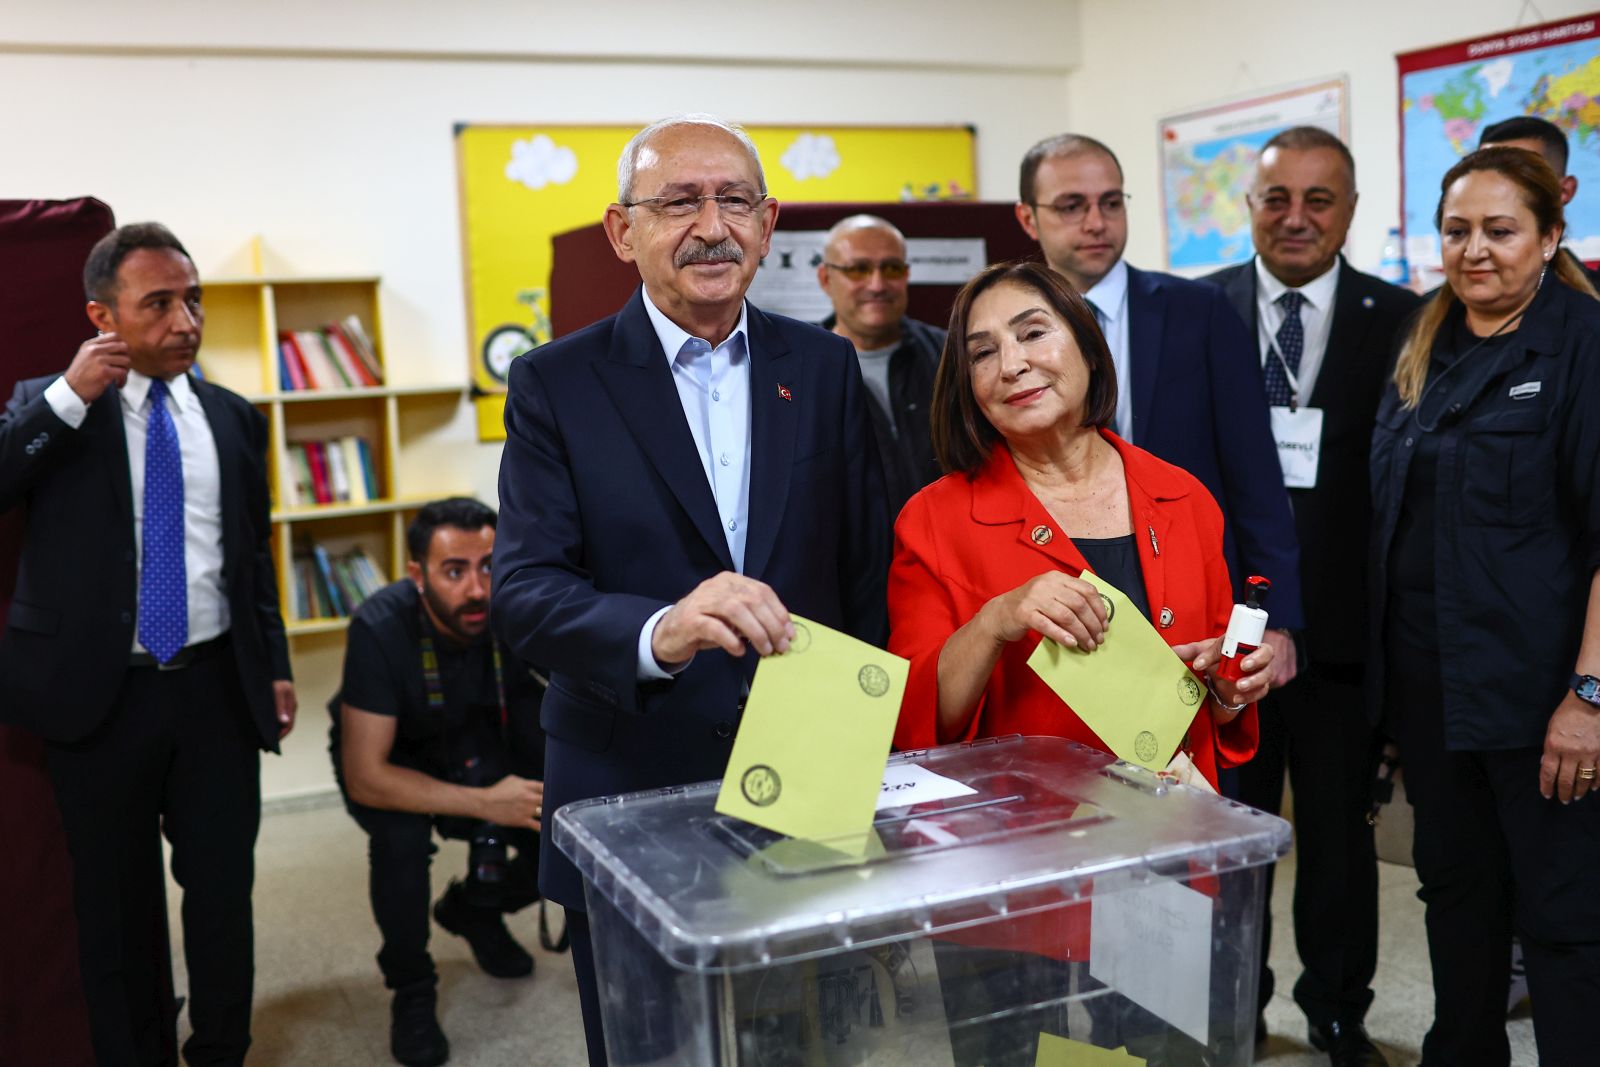 epa10659627 Turkish presidential candidate Kemal Kilicdaroglu (L),  leader of the opposition Republican People's Party (CHP) and and his wife Selvi Kilicdaroglu vote at a polling station in Ankara, Turkey, 28 May 2023. The second round of presidential elections between Turkish President Recep Tayyip Erdogan and his challenger Kemal Kilicdaroglu, the leader of the opposition Republican People's Party (CHP), is held 28 May.  EPA/SEDAT SUNA